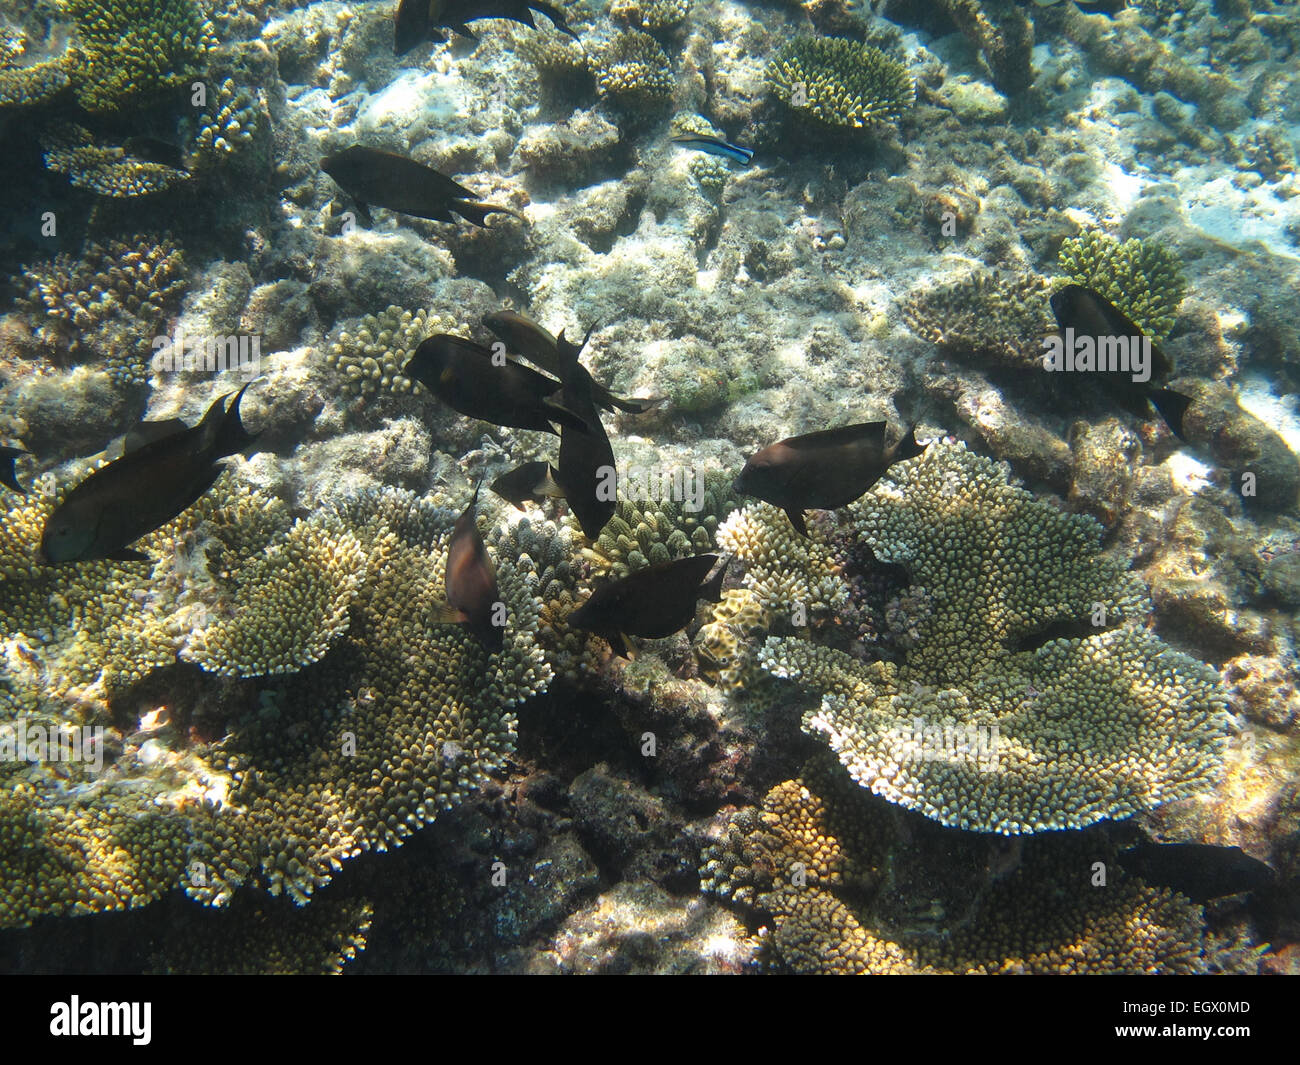 A shoal of Stegastes nigricans, the Dusky Farmerfish, or Black Gregory on a coral reef in the Maldives Stock Photo